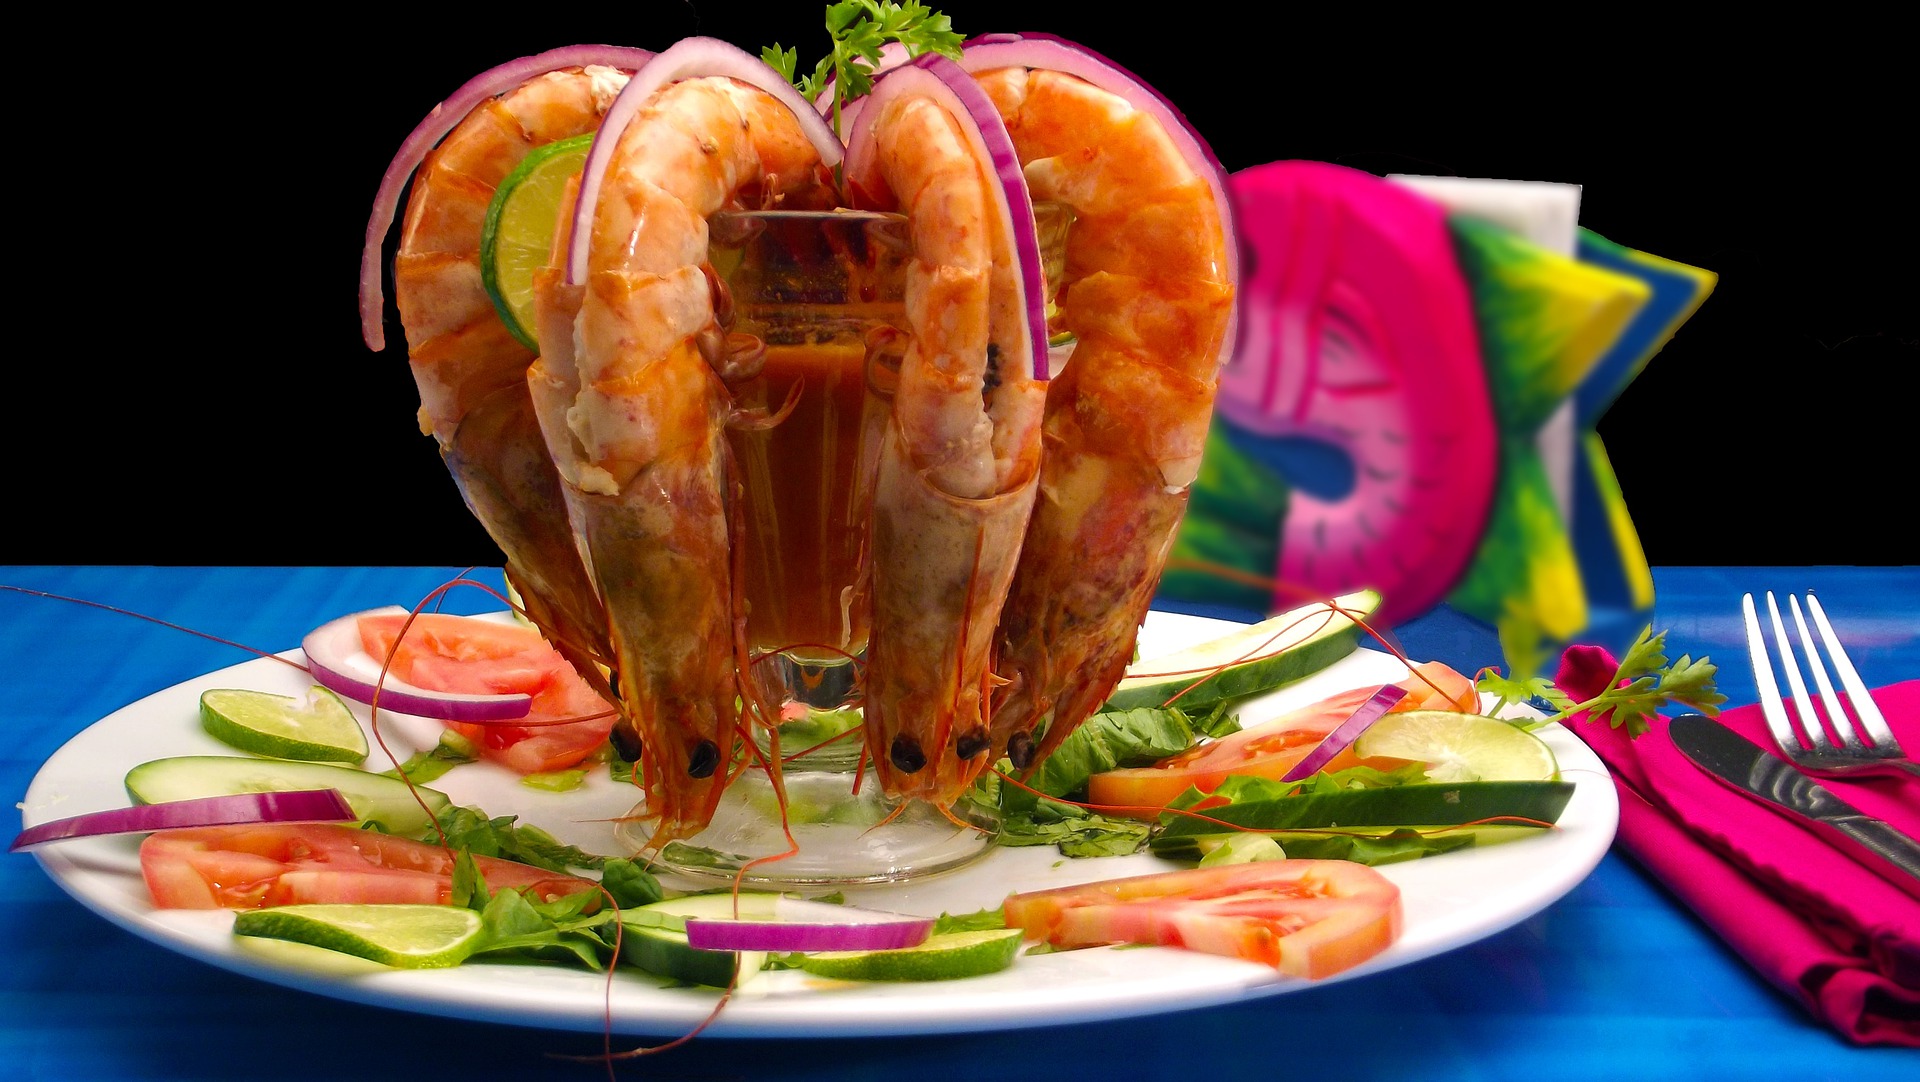 Dive into Flavors at the Best Seafood Restaurant in Abu Dhabi